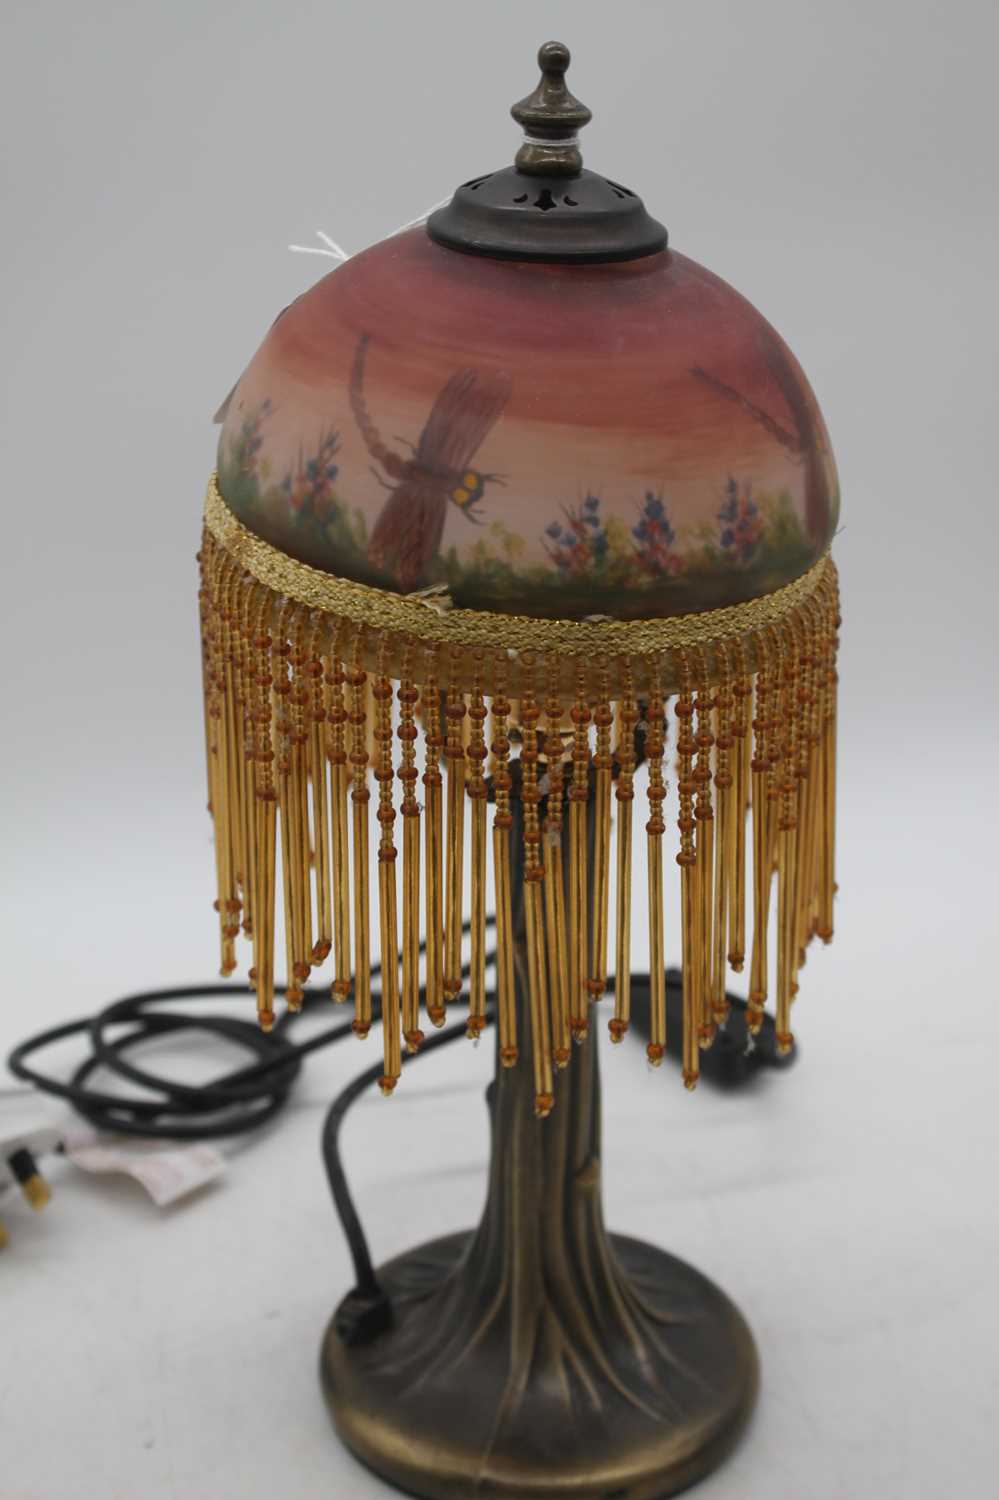 A Tiffany style table lamp, having a glass shade decorated with dragonflies amongst flowers,